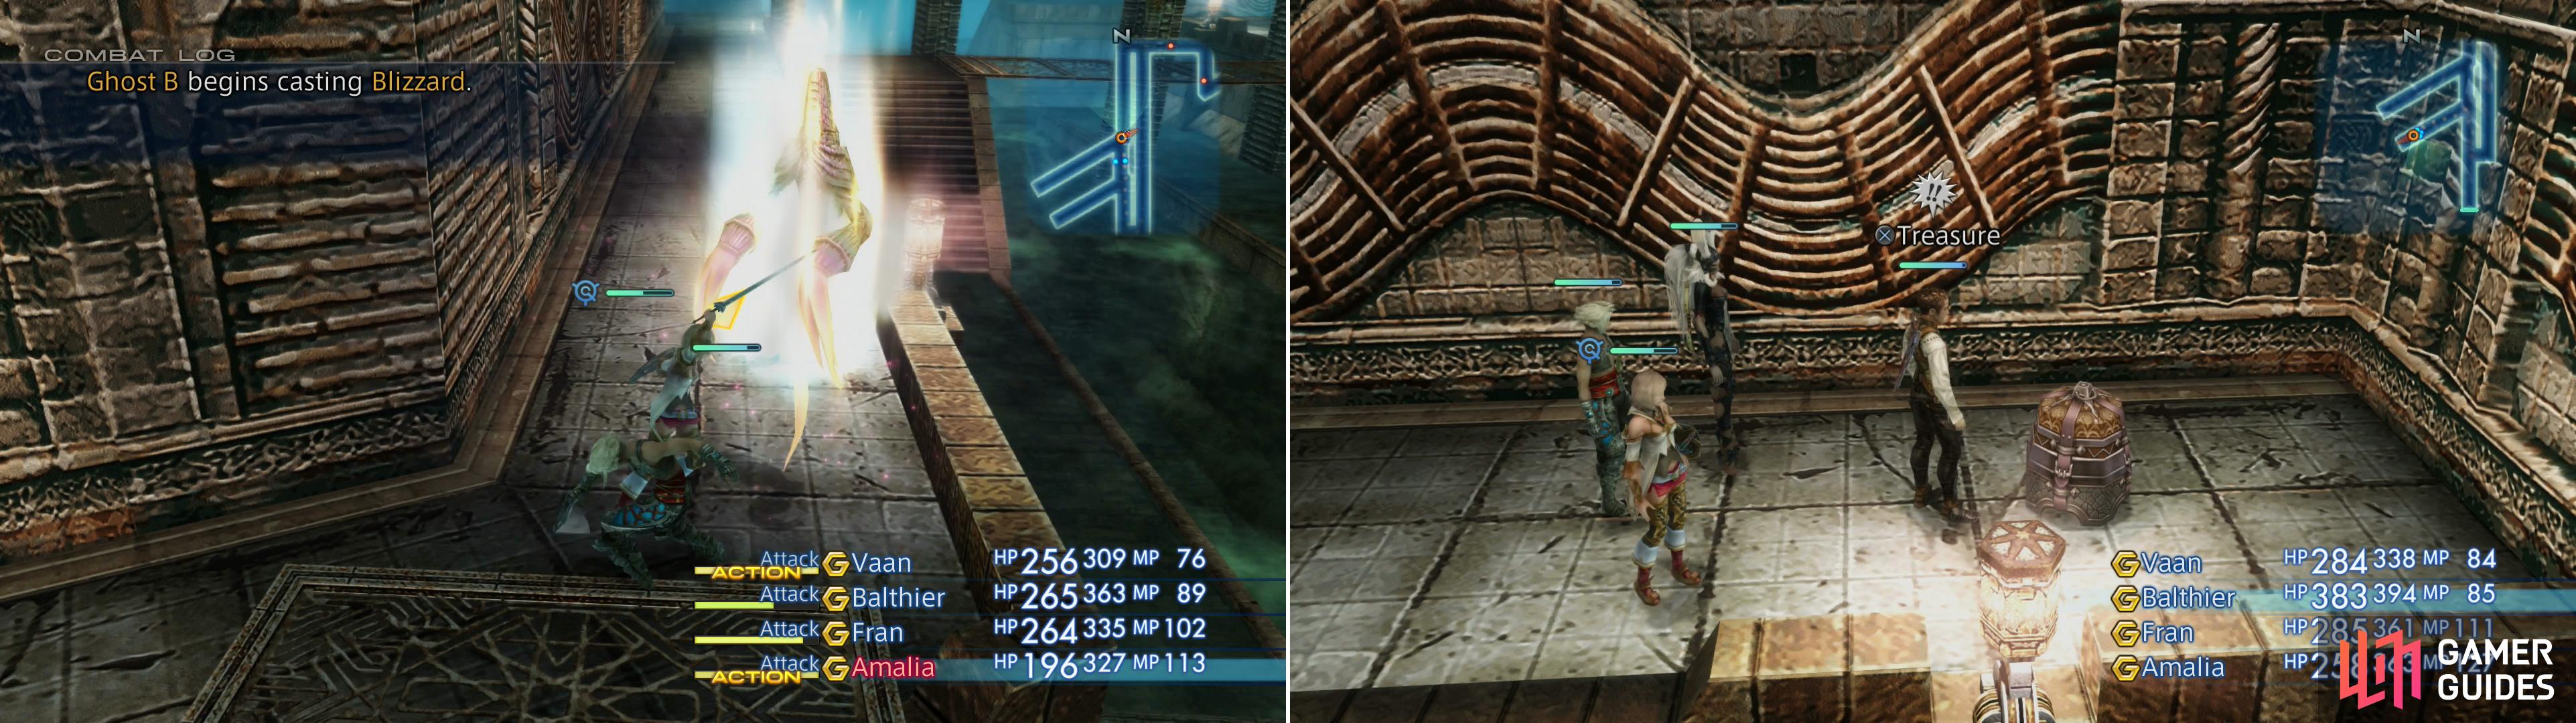 Ghosts have the annoying habit of teleporting when you’re about to attack (left). Endure them and other foes and plunder chests as you work through the sewers (right).